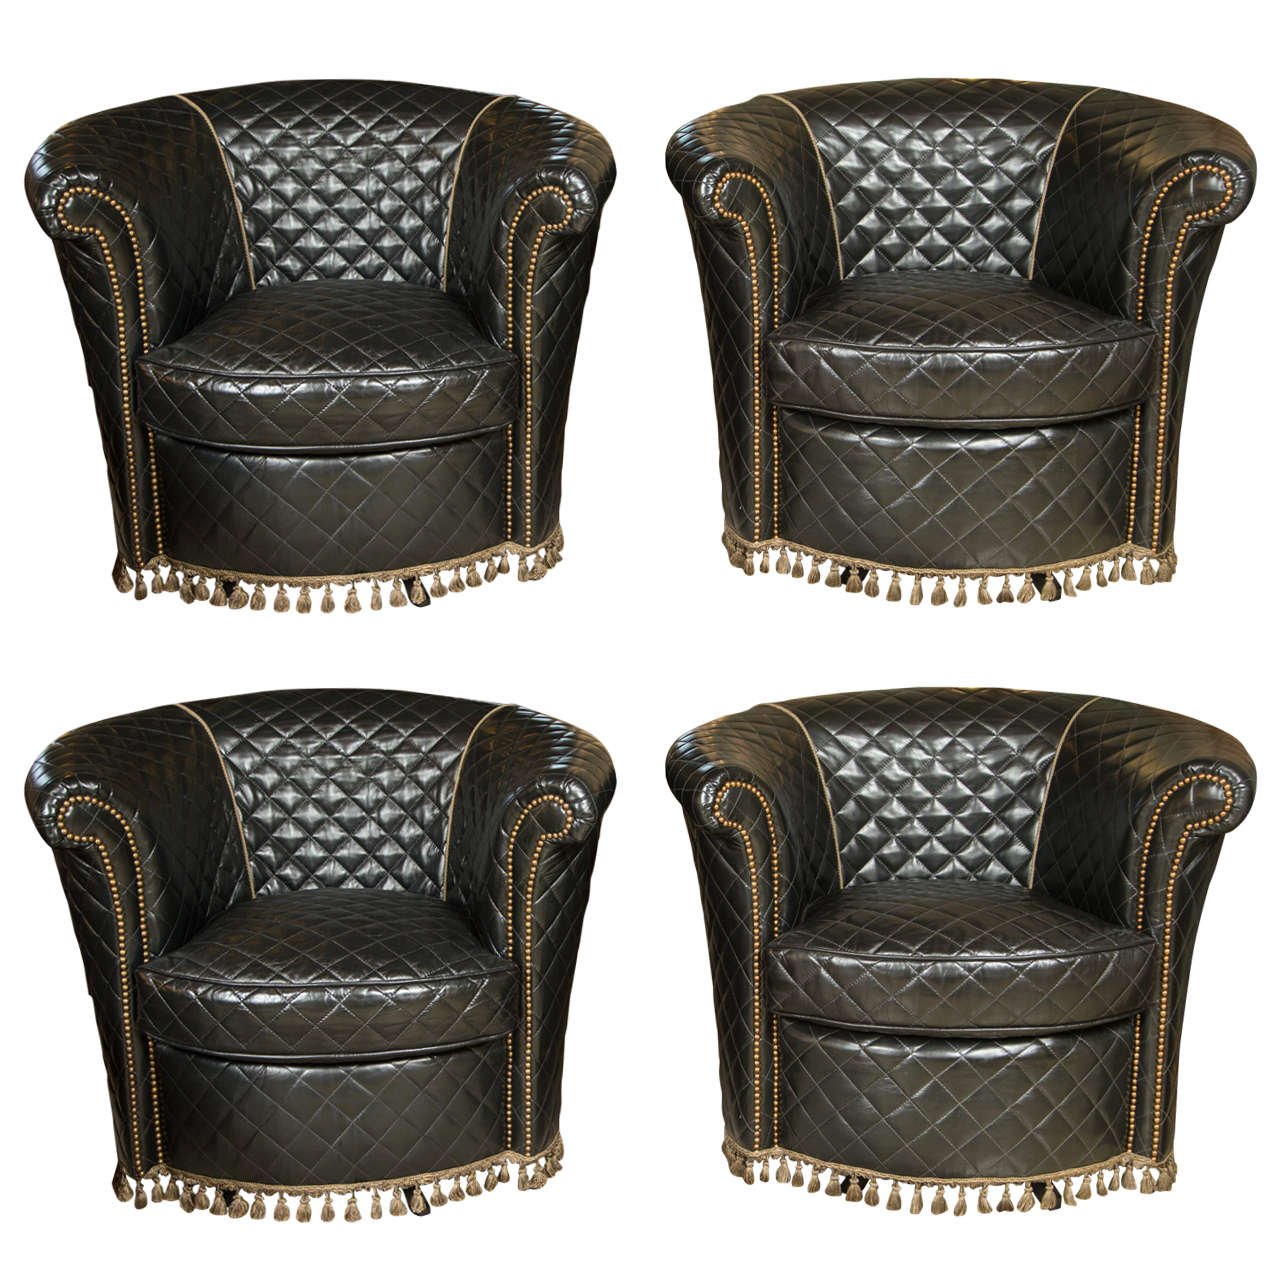 A Group of Four Coco Chanel Styled Barrel Back Leather Chairs